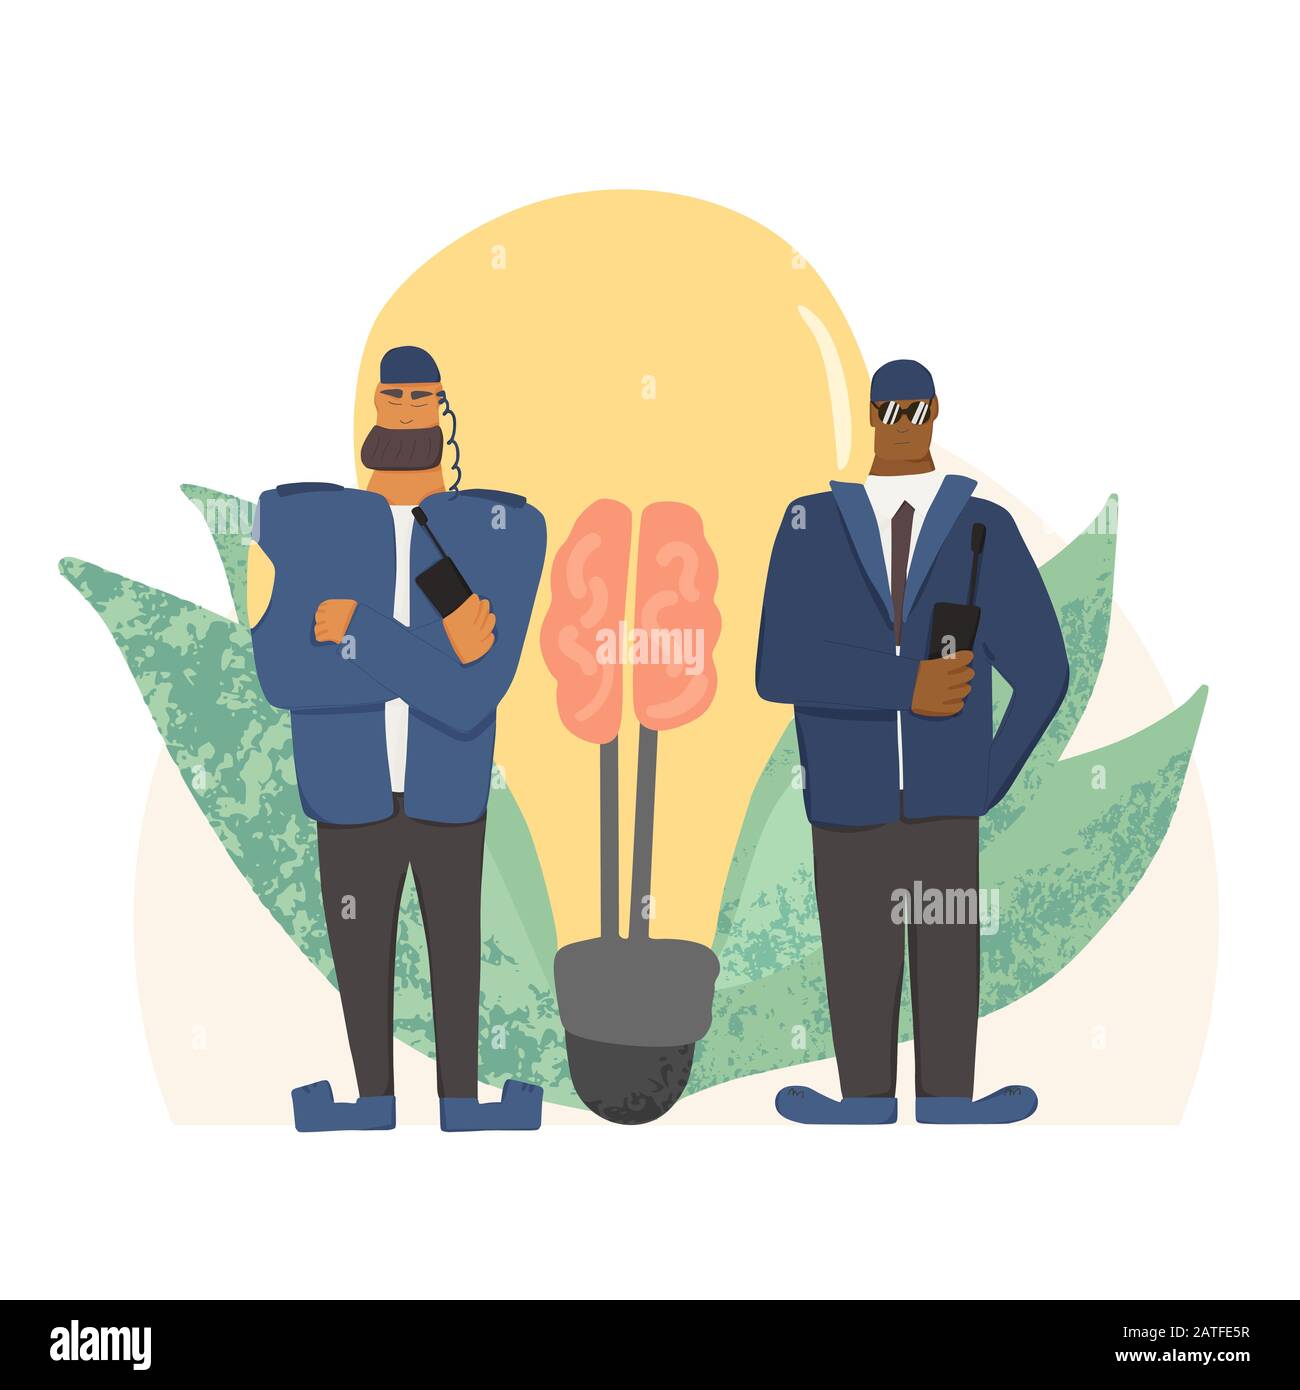 Creative idea saving. Security guards standing with arms crossed.Two men wearing in a guards uniform protecting idea of copyright from plagiarism. Peo Stock Vector